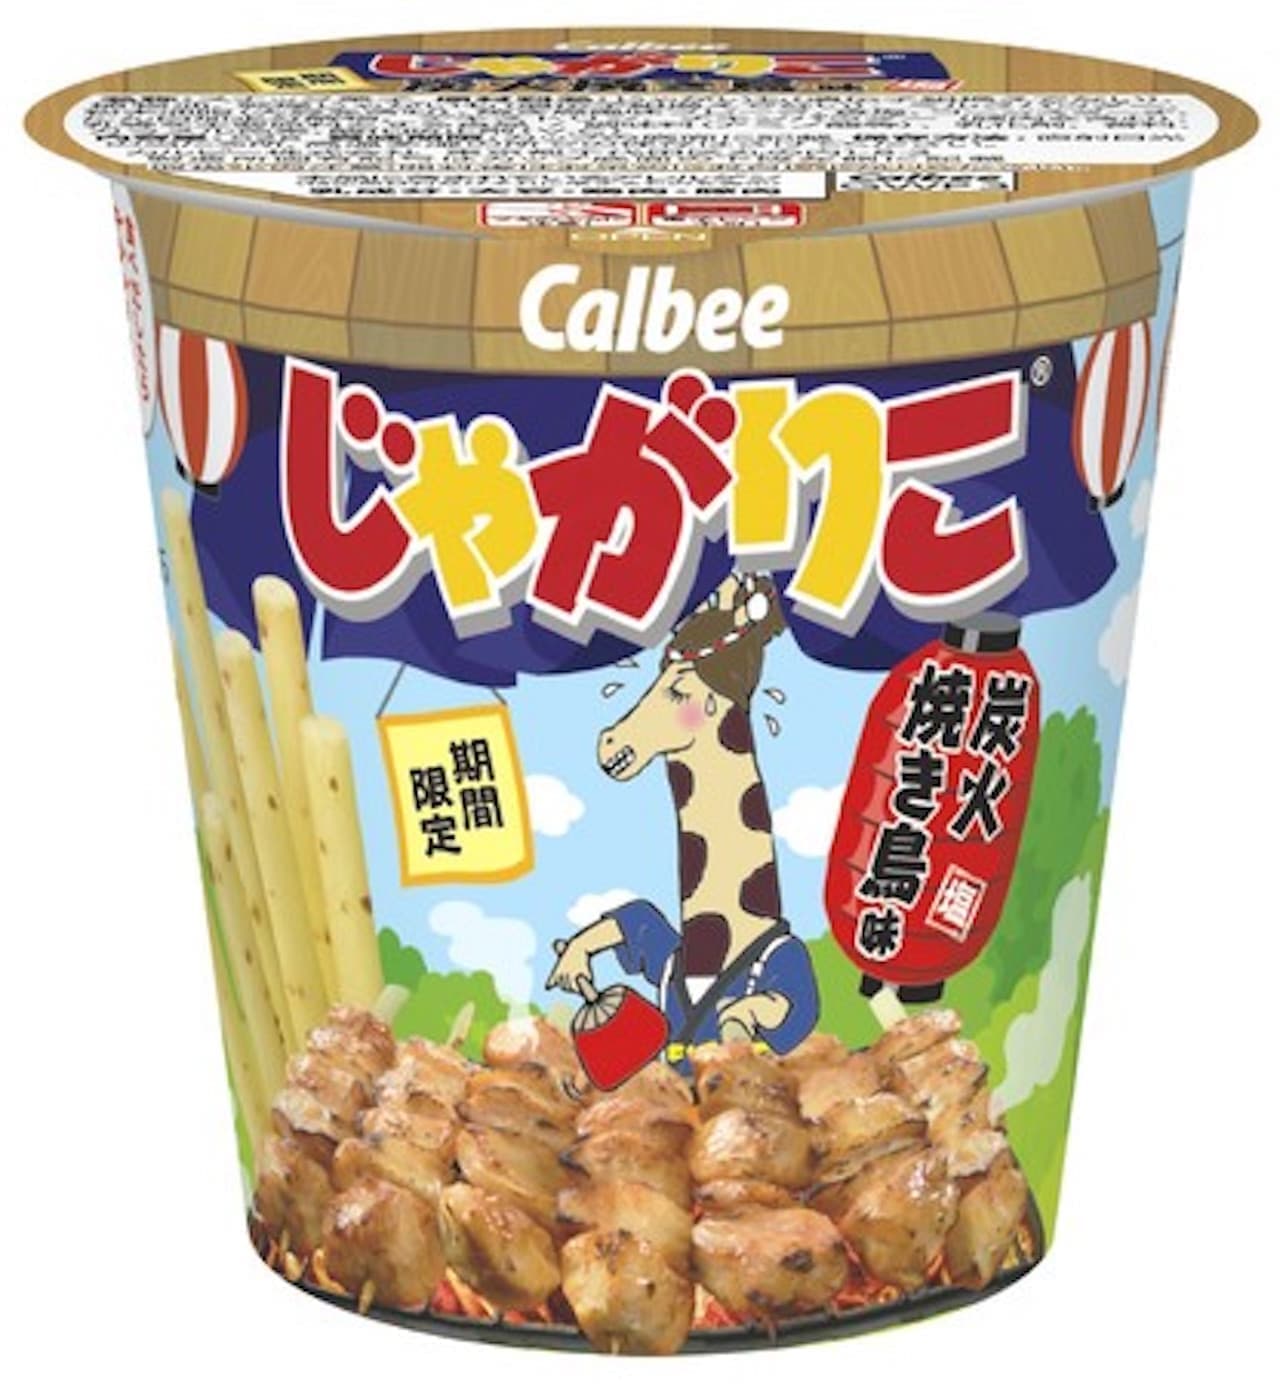 Limited time "Jagarico Charcoal Yakitori Flavor" Convenience Store Advance